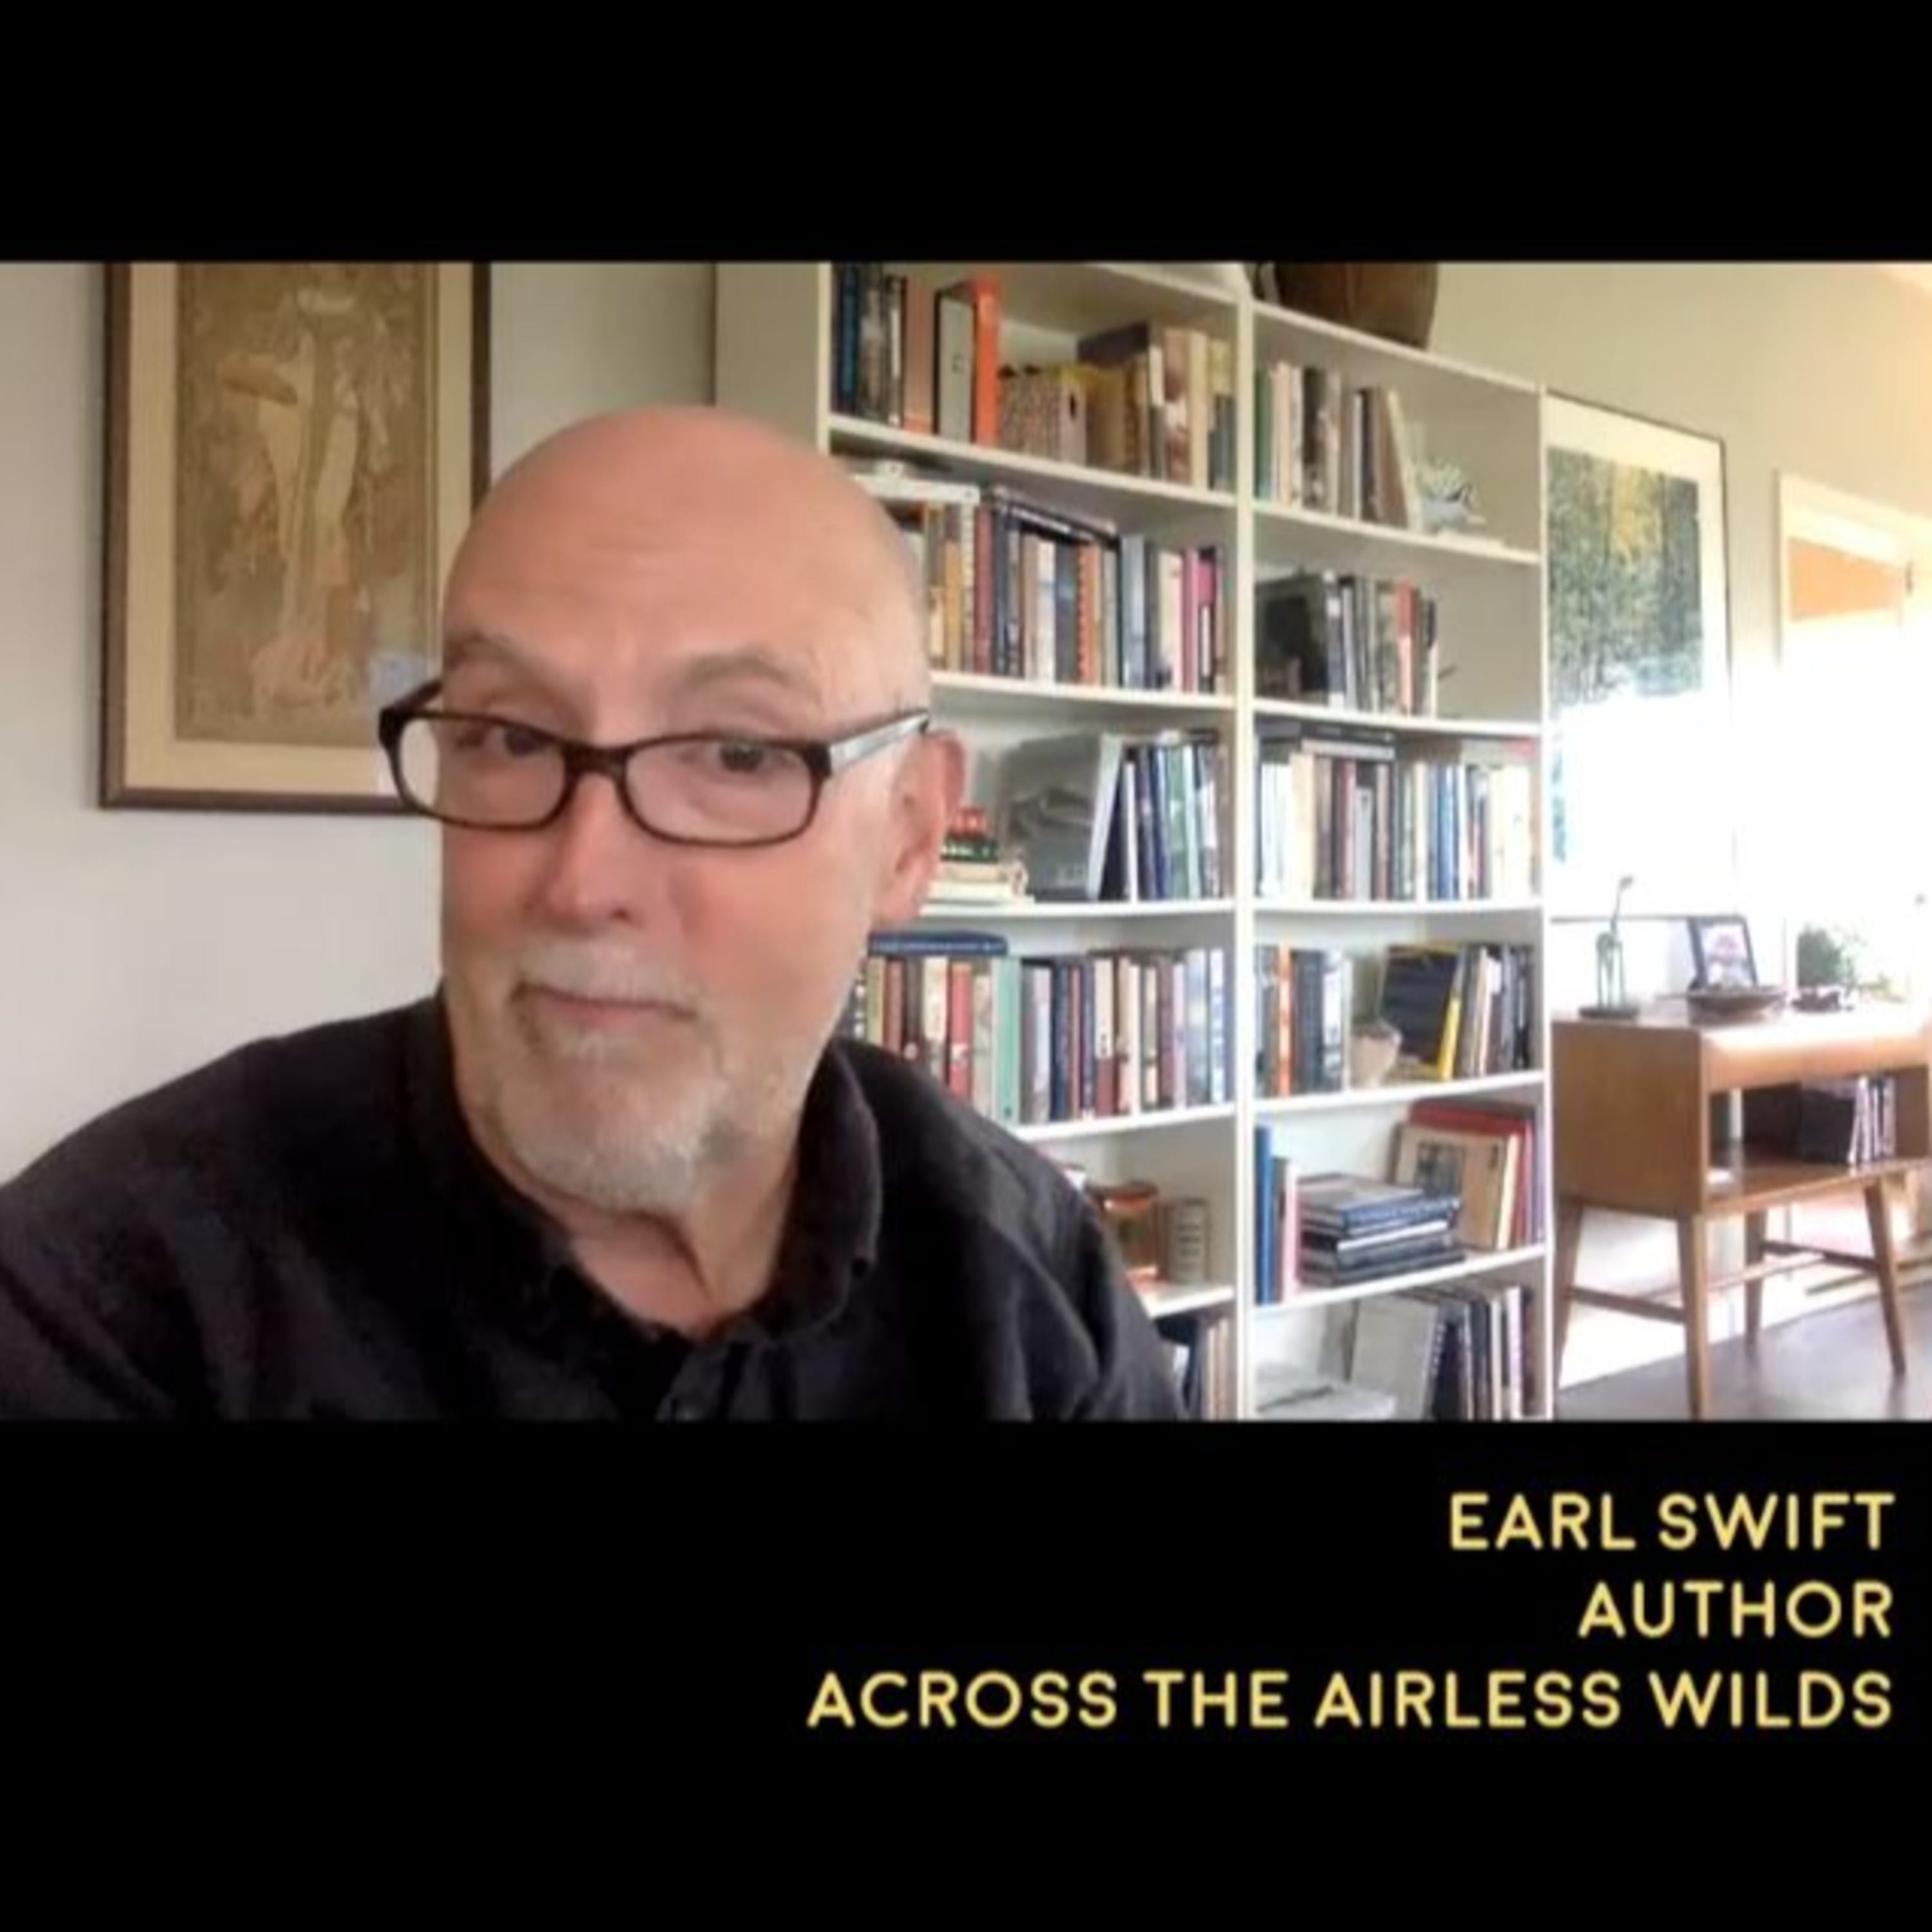 Earl Swift Takes Us Across the Airless Wilds - Astronomy News with The Cosmic Companion 20 July 2021